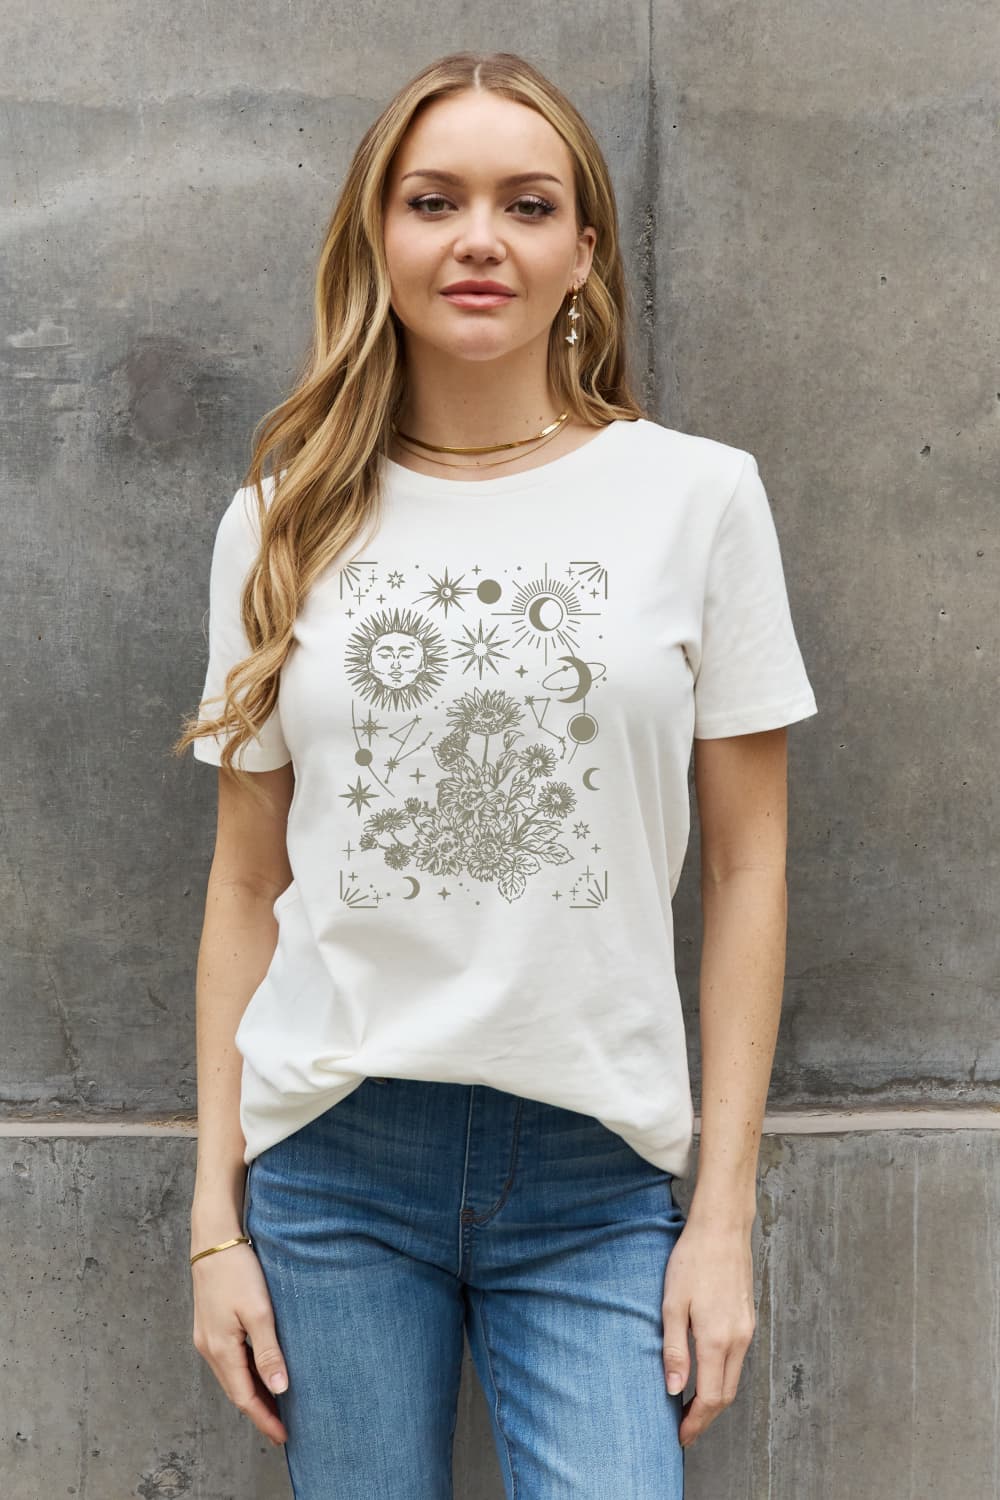 Slate Gray Simply Love Celestial Graphic Short Sleeve Cotton Tee Sentient Beauty Fashions Apparel & Accessories